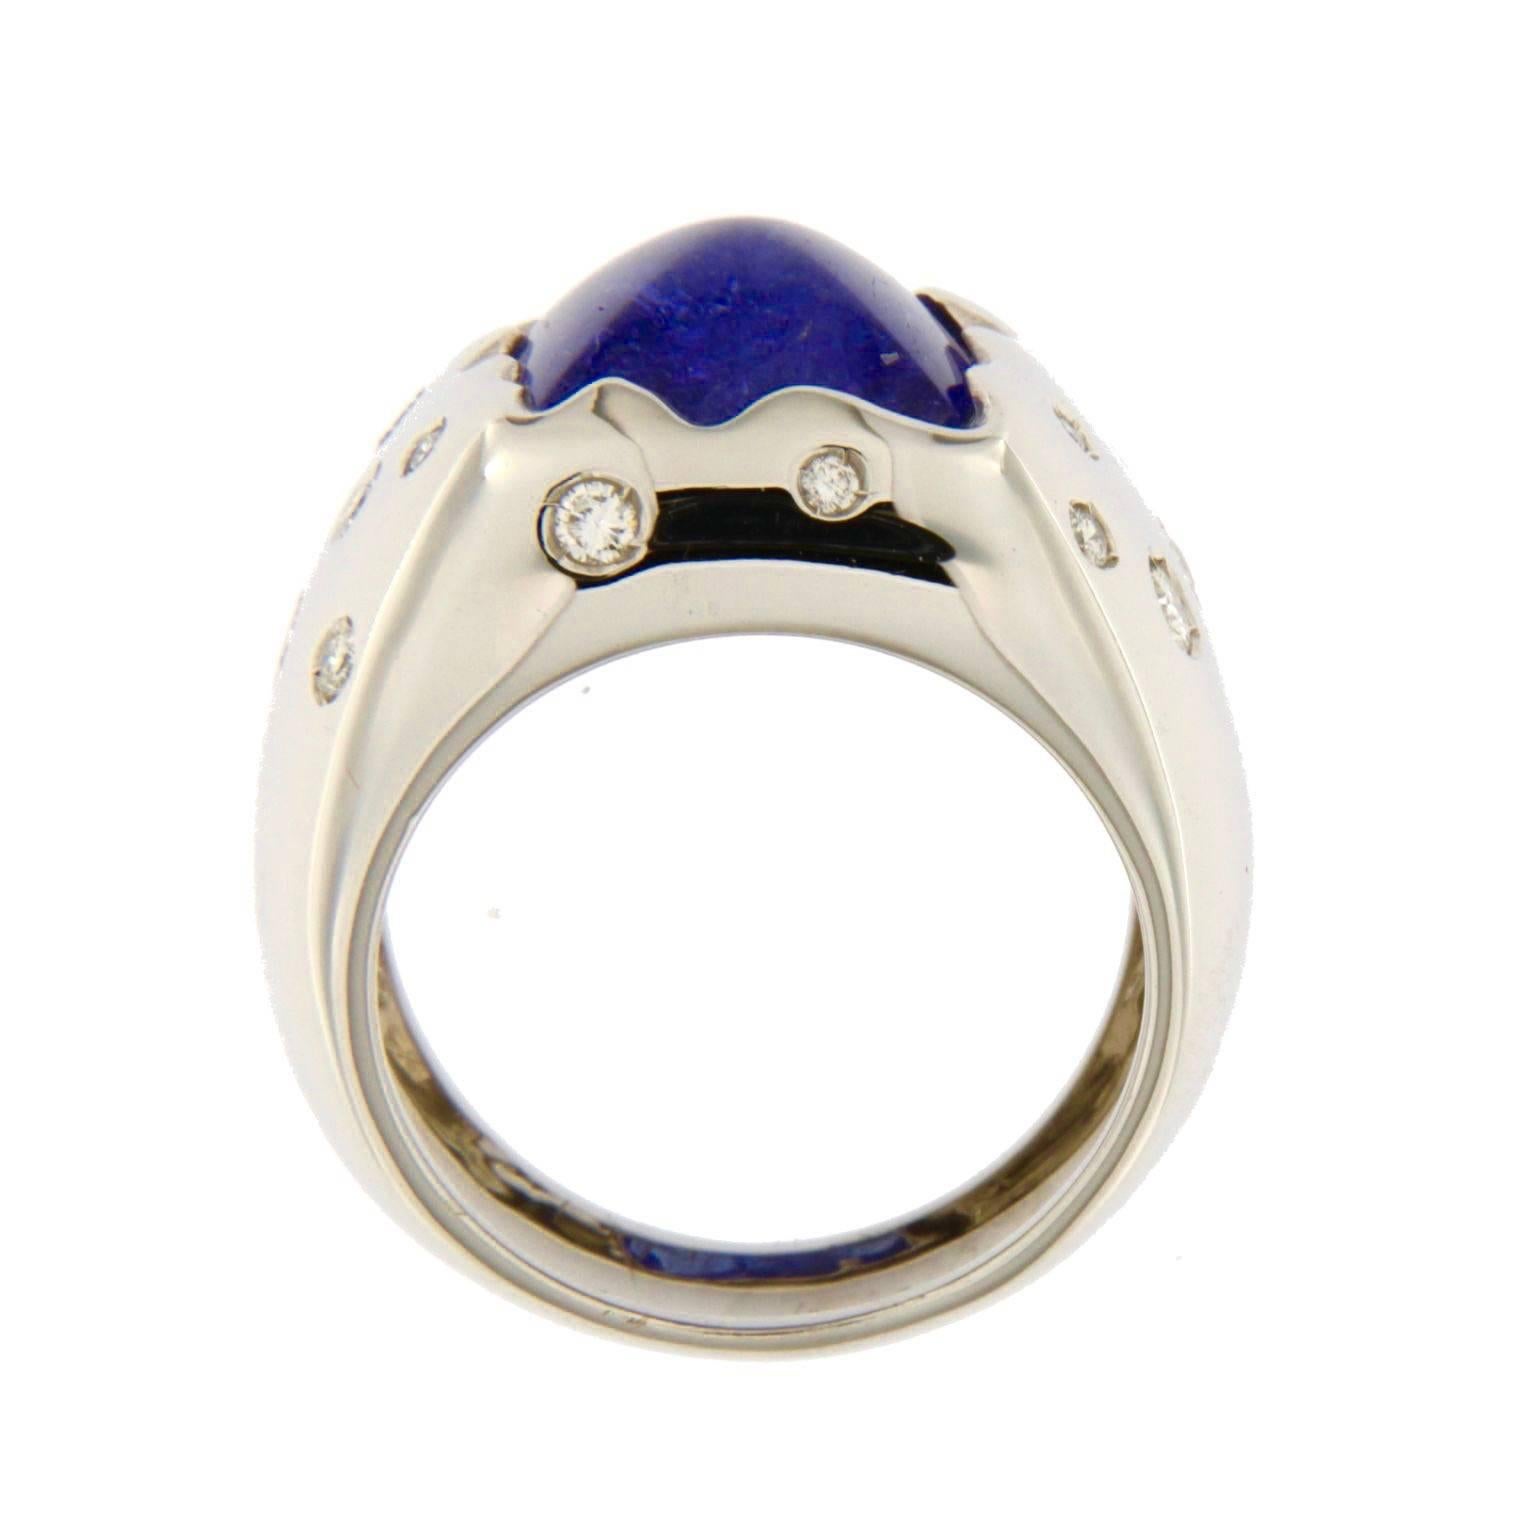 Jona design collection, 18 karat white gold ring, centering a cabochon Tanzanite weighing 7.67 carats, accented with 16 white diamonds weighing 0.35 carats. 

All Jona jewelry is new and has never been previously owned or worn. Each item will arrive